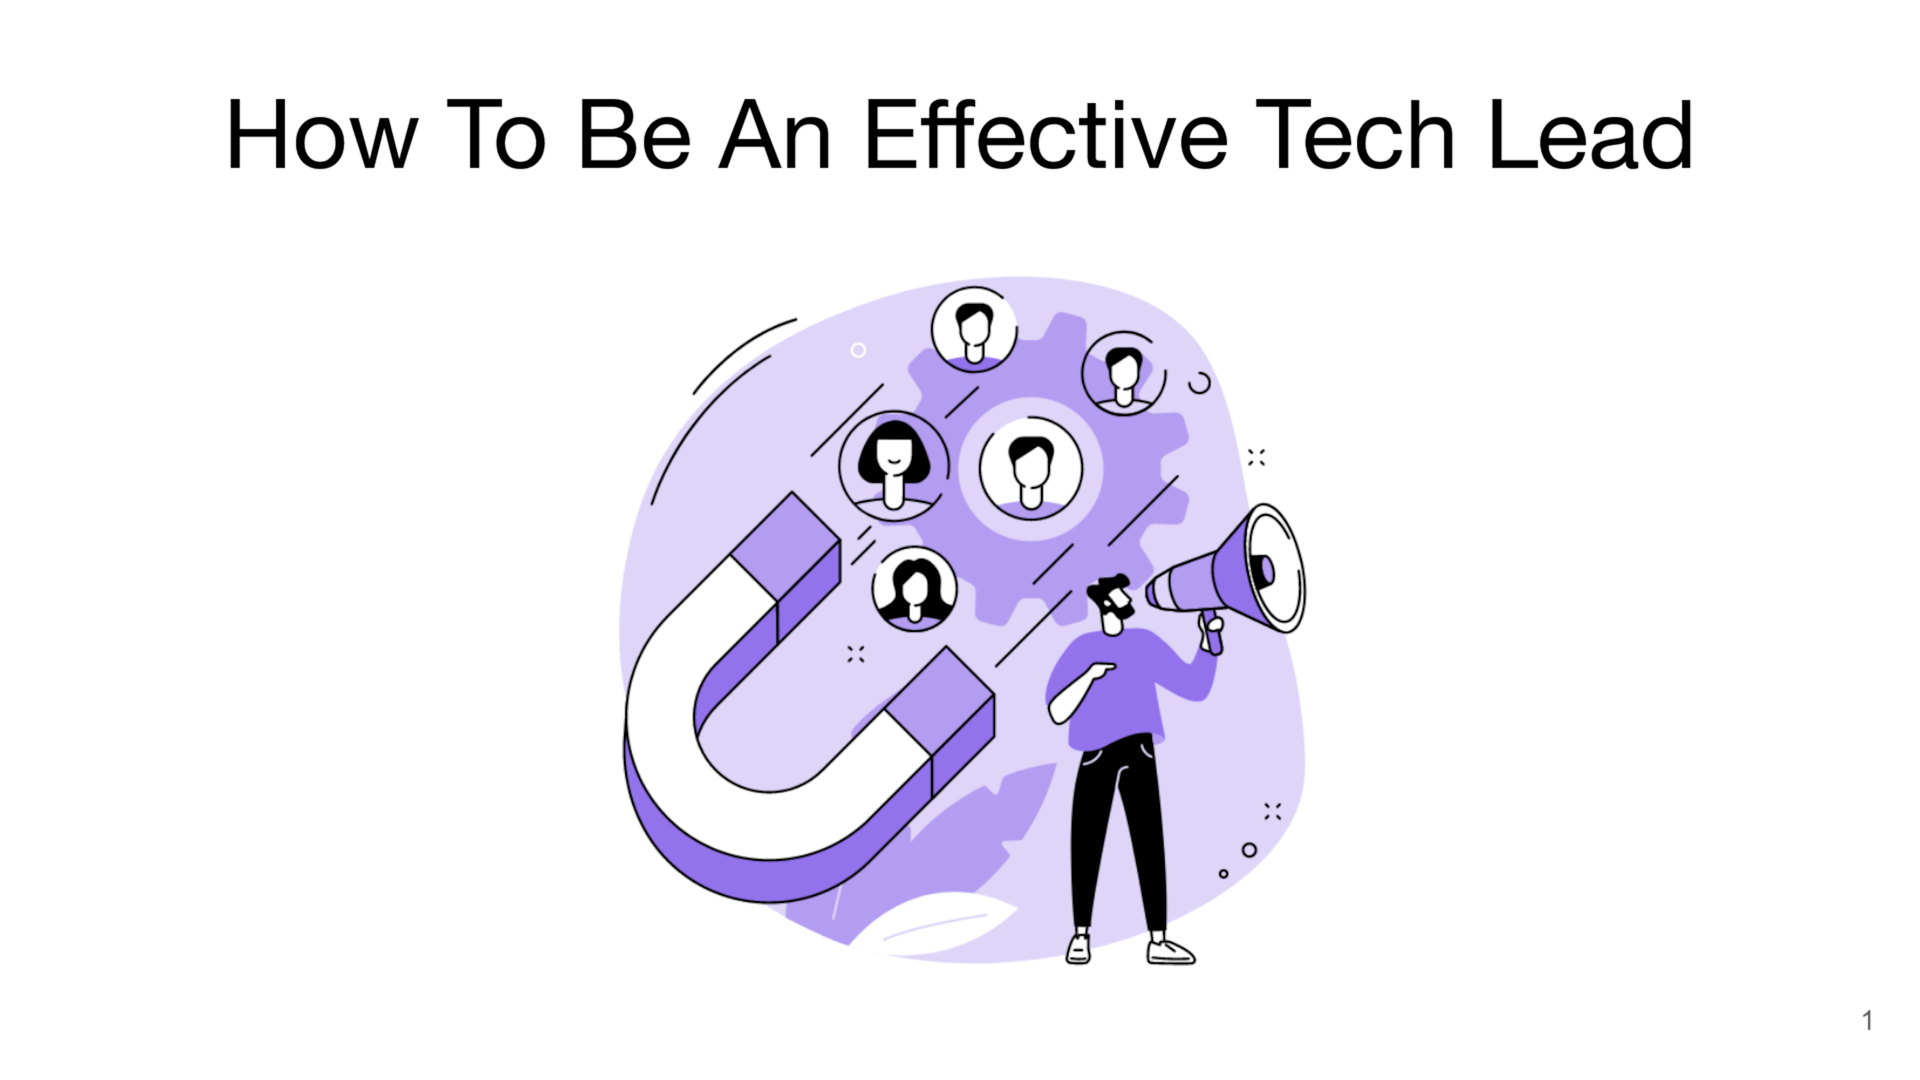 How To Be An Effective Tech Lead [Part 1] - How This Course Works